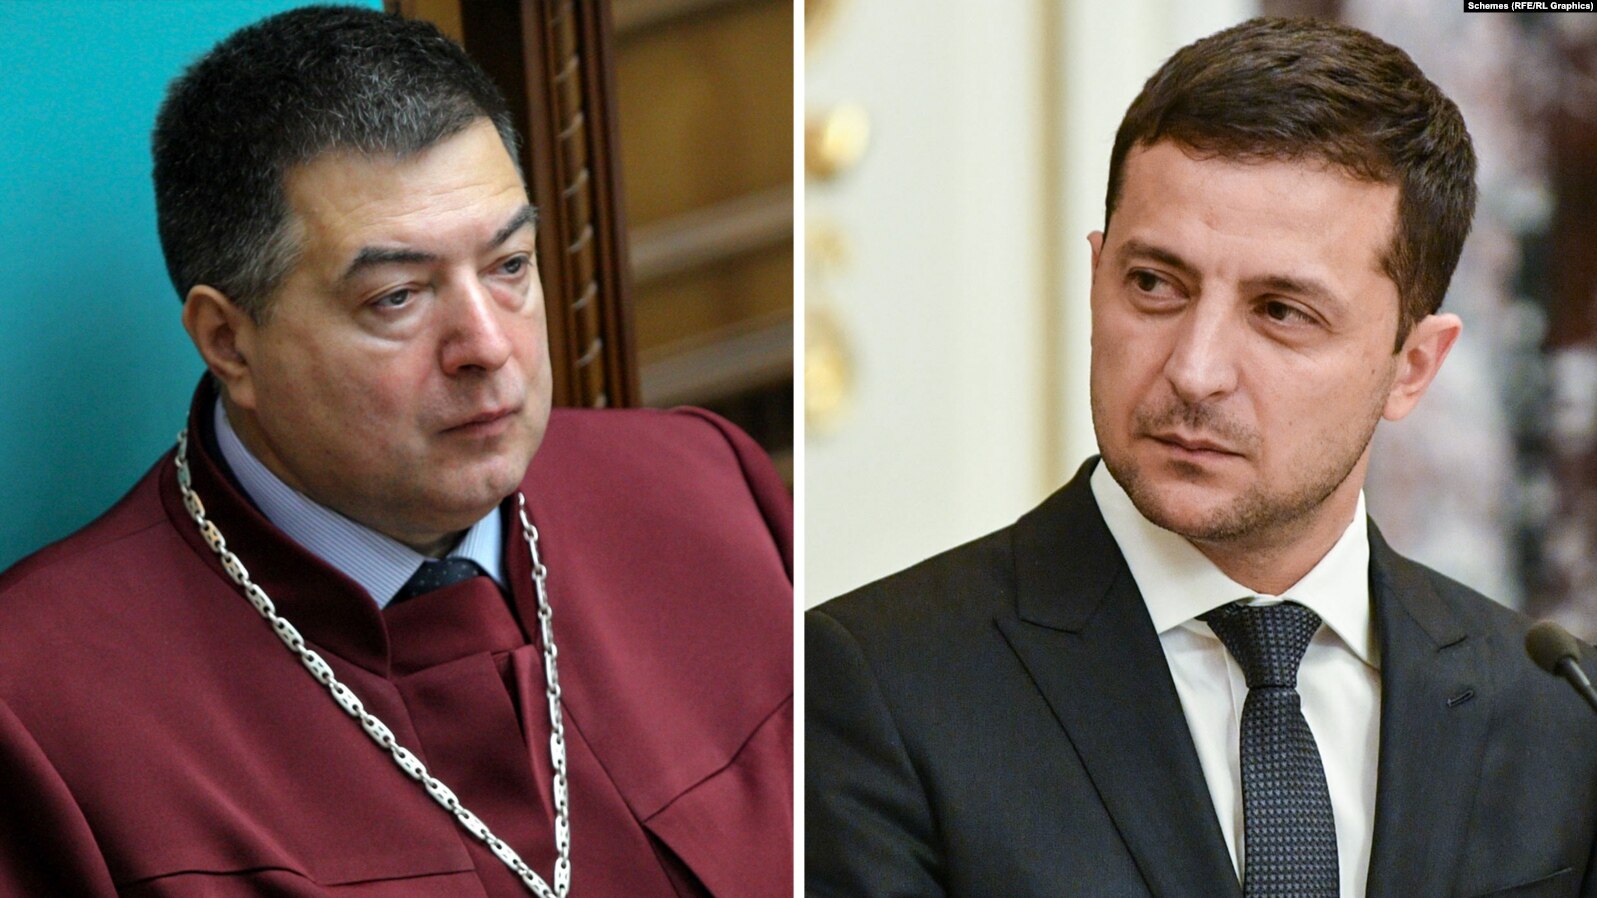 Zelenskyy dismisses two Constitutional Court judges, deepening constitutional crisis